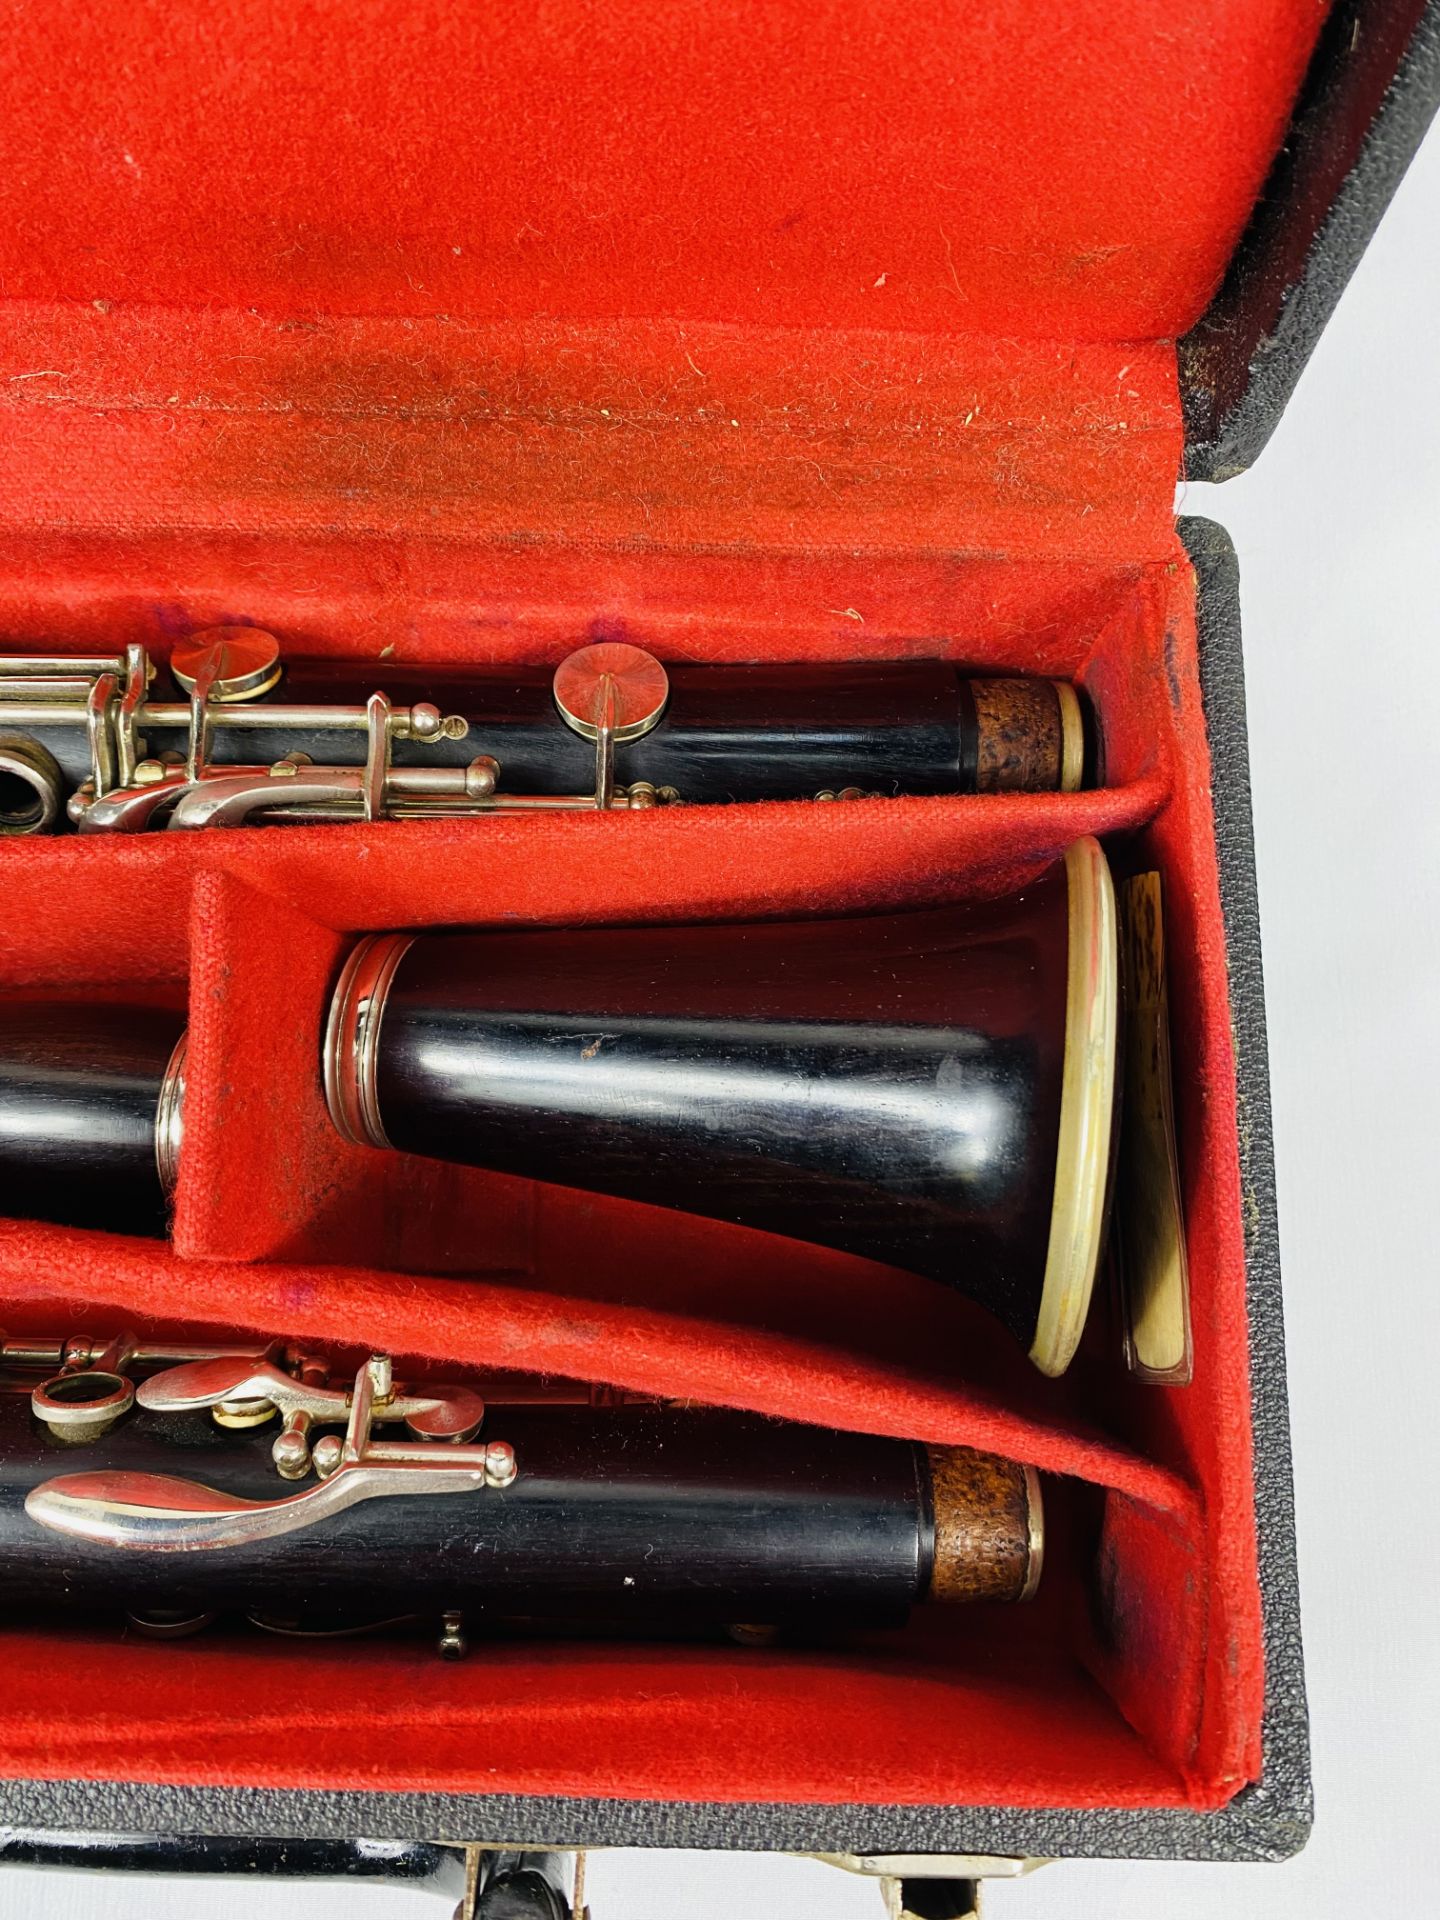 Boosey and Hawkes clarinet in case - Image 3 of 4